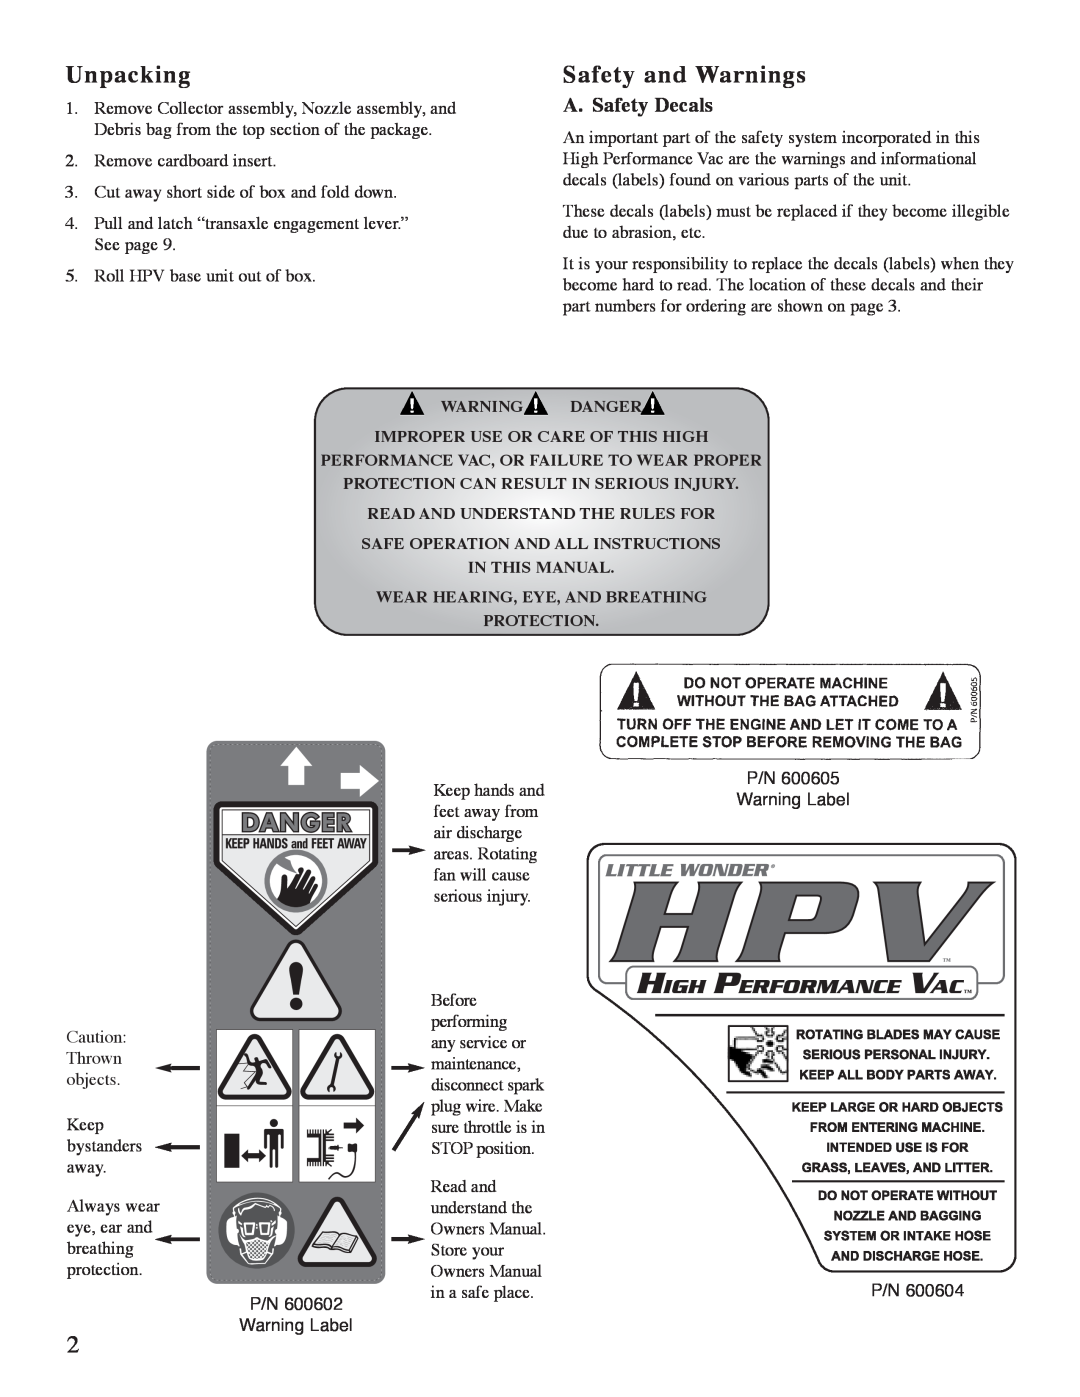 Little Wonder 5621 A. Safety Decals, Warningdanger Improper Use Or Care Of This High, Read And Understand The Rules For 